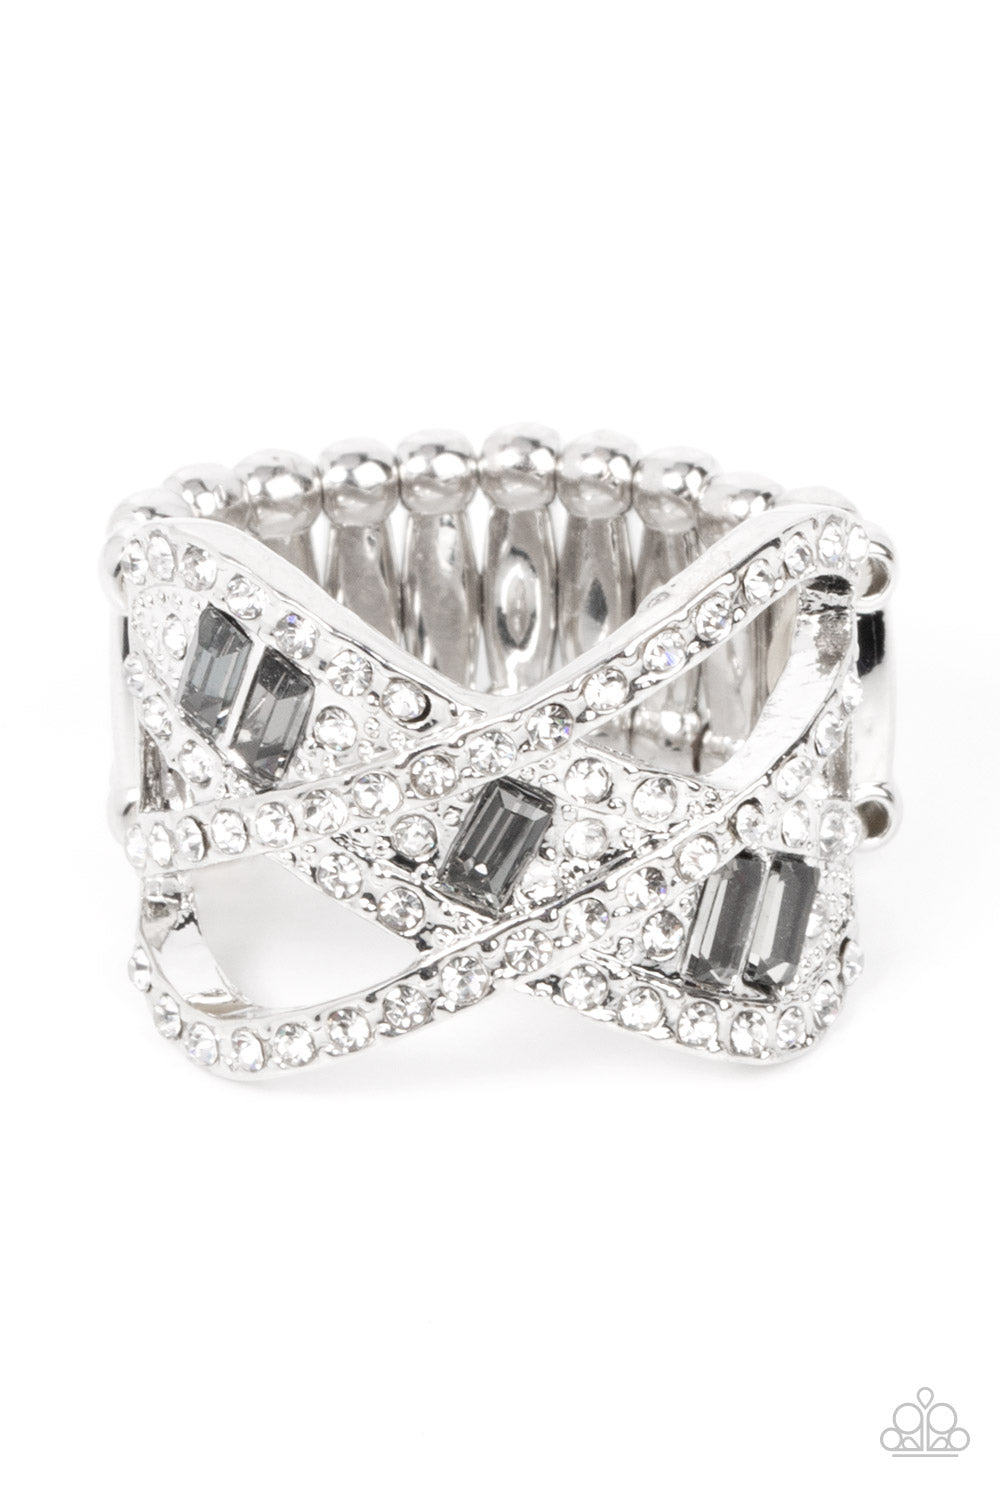 Triple Threat Twinkle - silver - Paparazzi ring